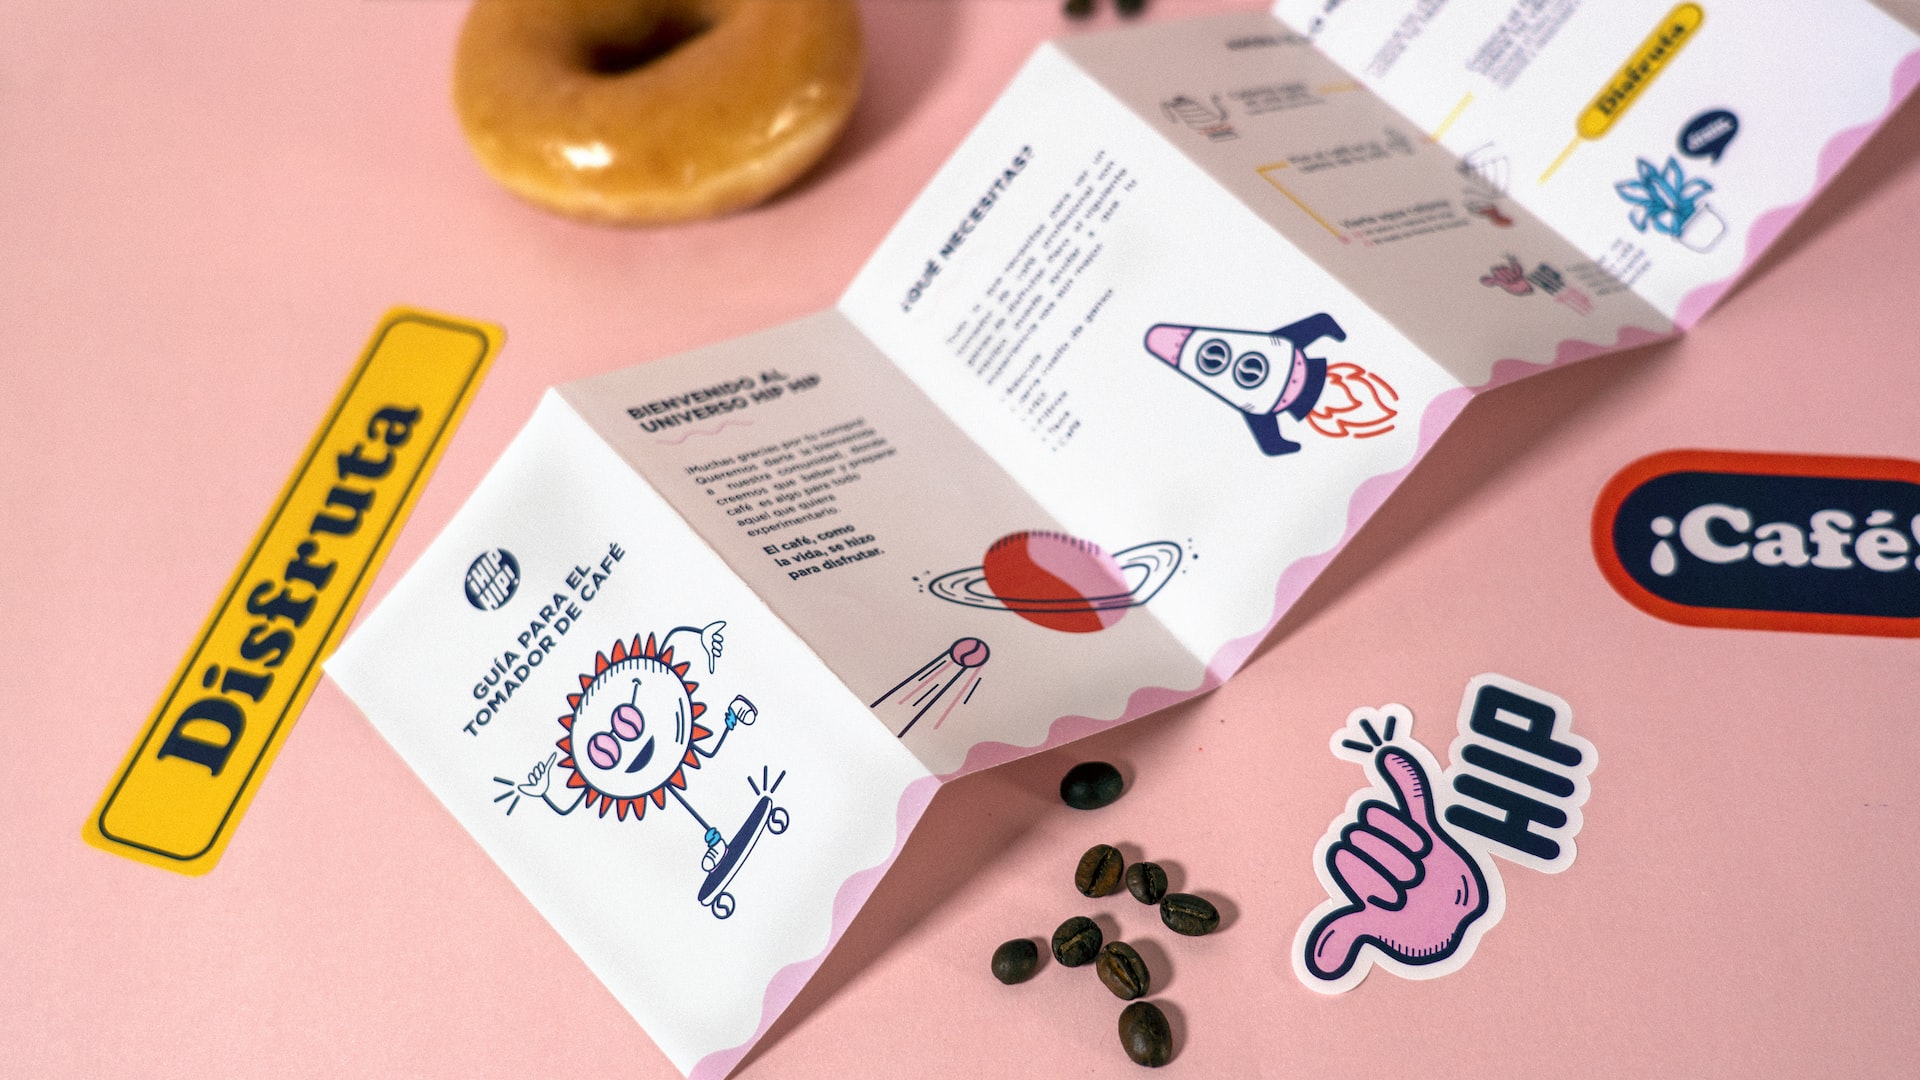 Fun branding leaflet of Spanish company with stickers on pink background